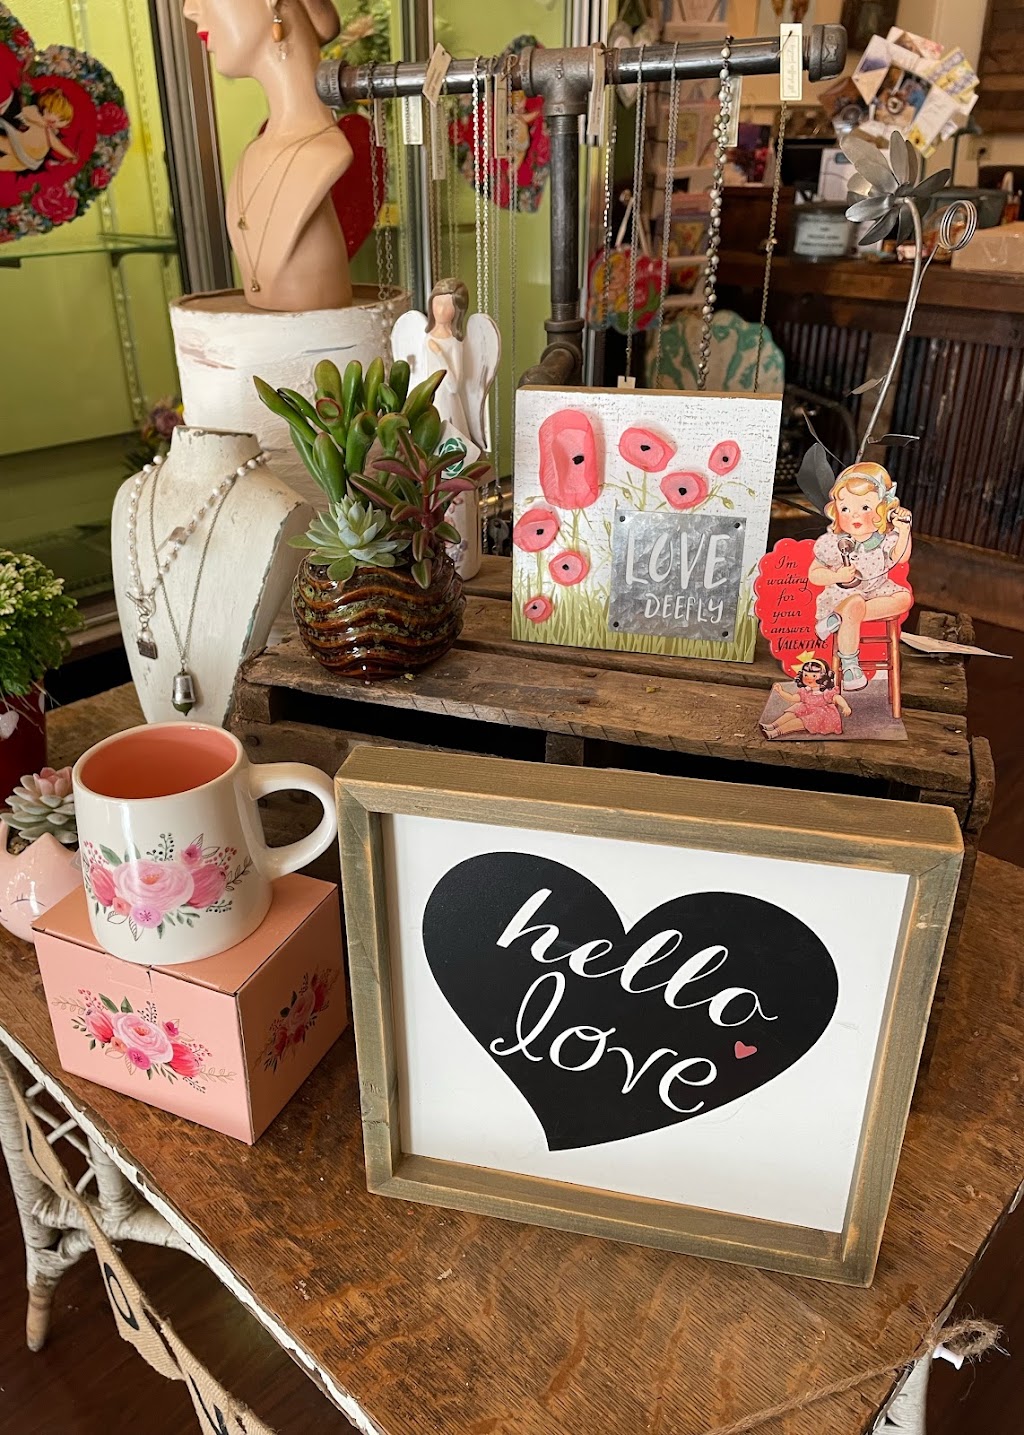 The Rustic Rose Flowers and Collectibles | 220 W Main St, Williamsburg, OH 45176 | Phone: (513) 724-9700